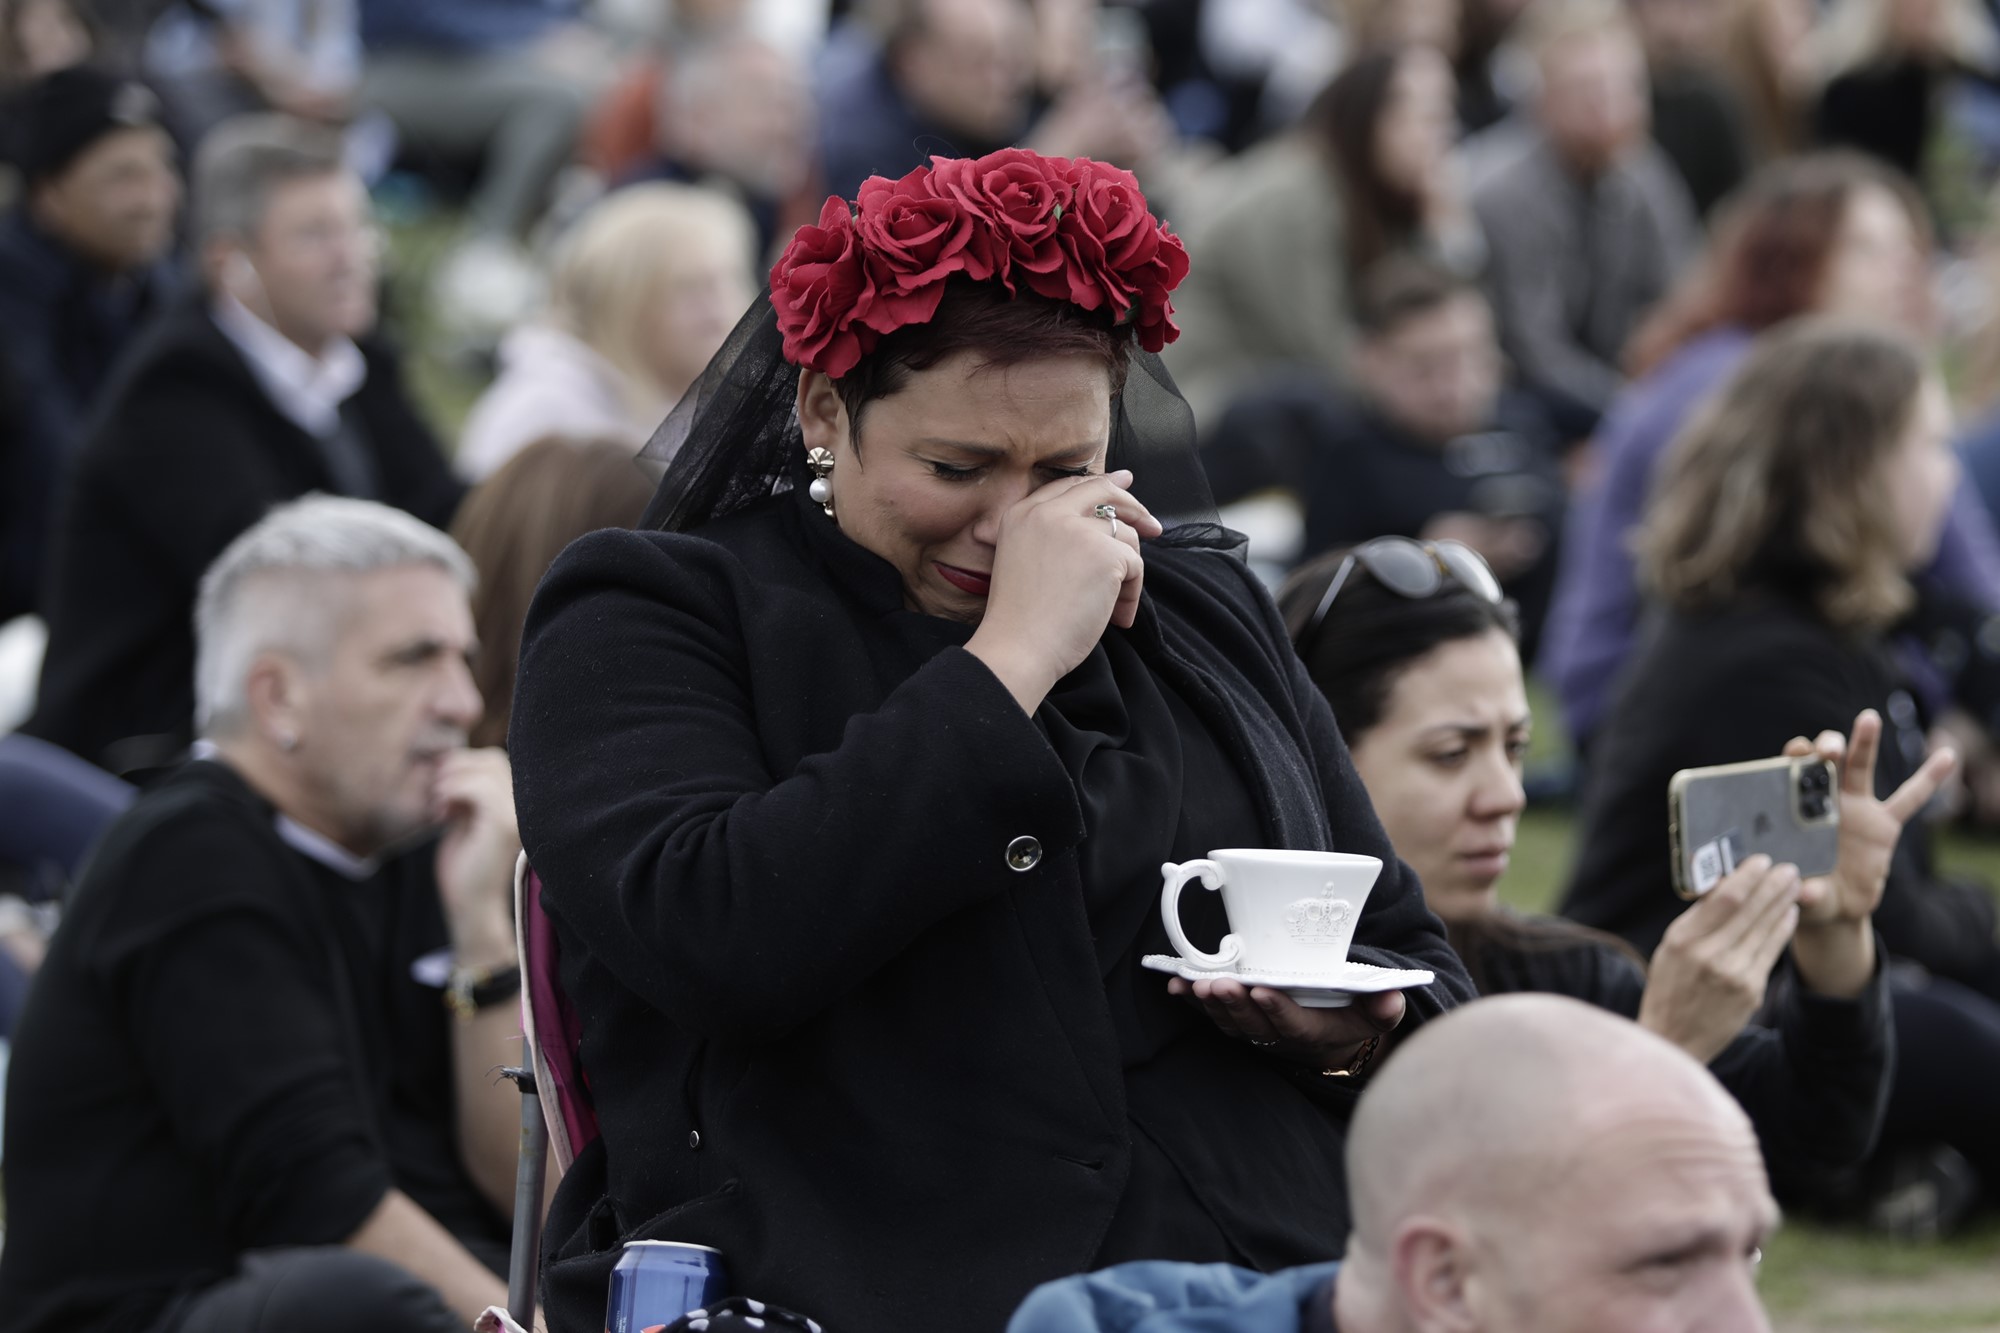 A woman sits crying while holding a cup of tea